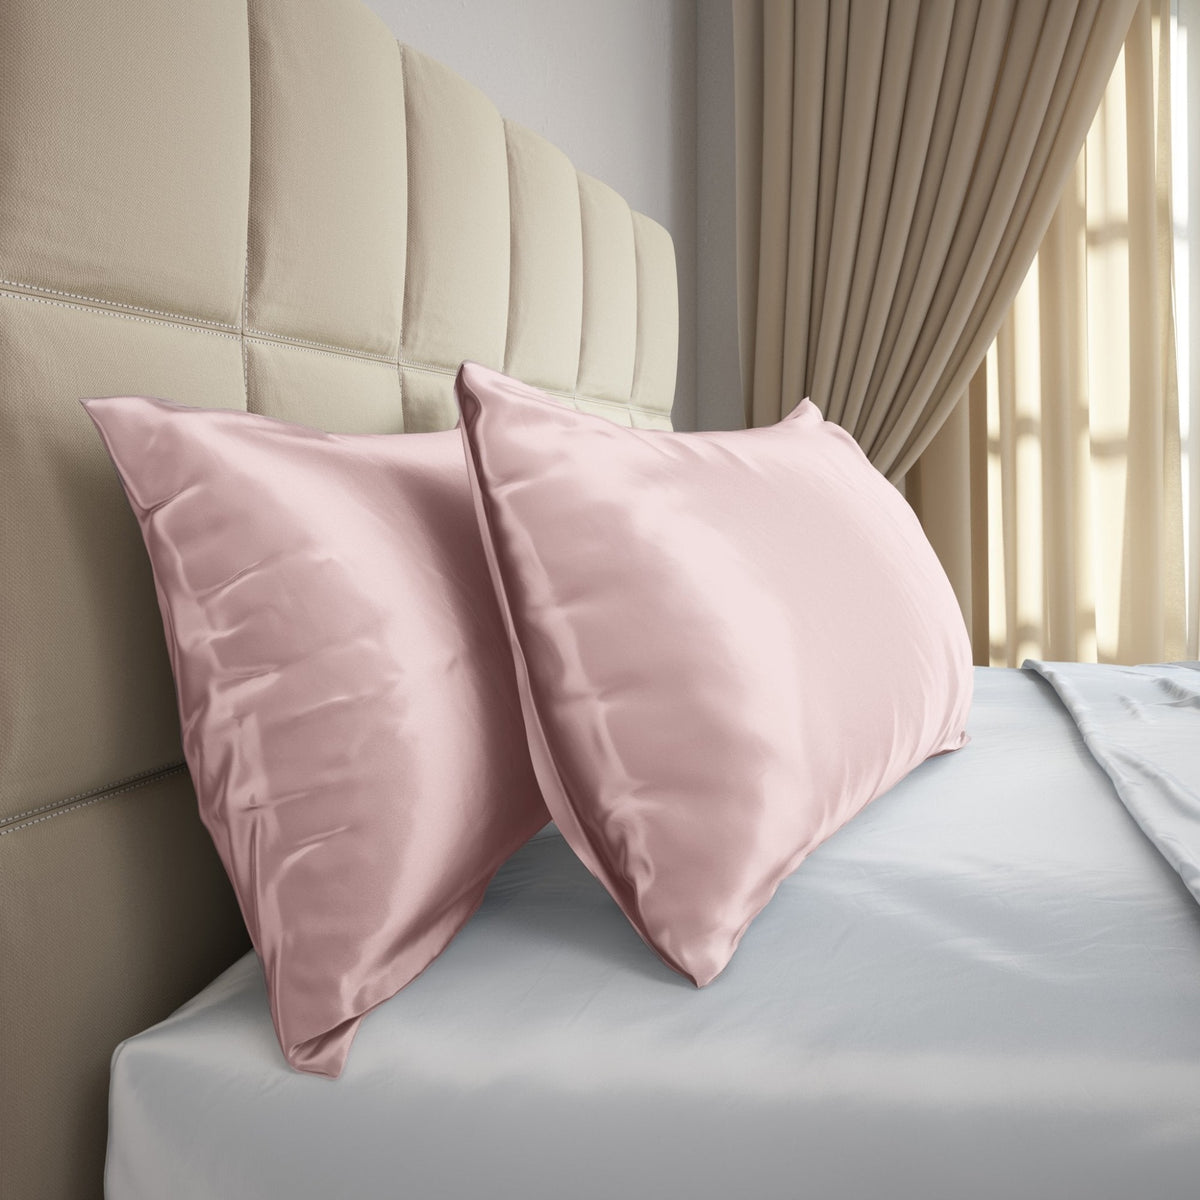 Sideview of Mulberry Park Silks Deluxe 19 Momme Pure Silk Pillowcase in Pink Color